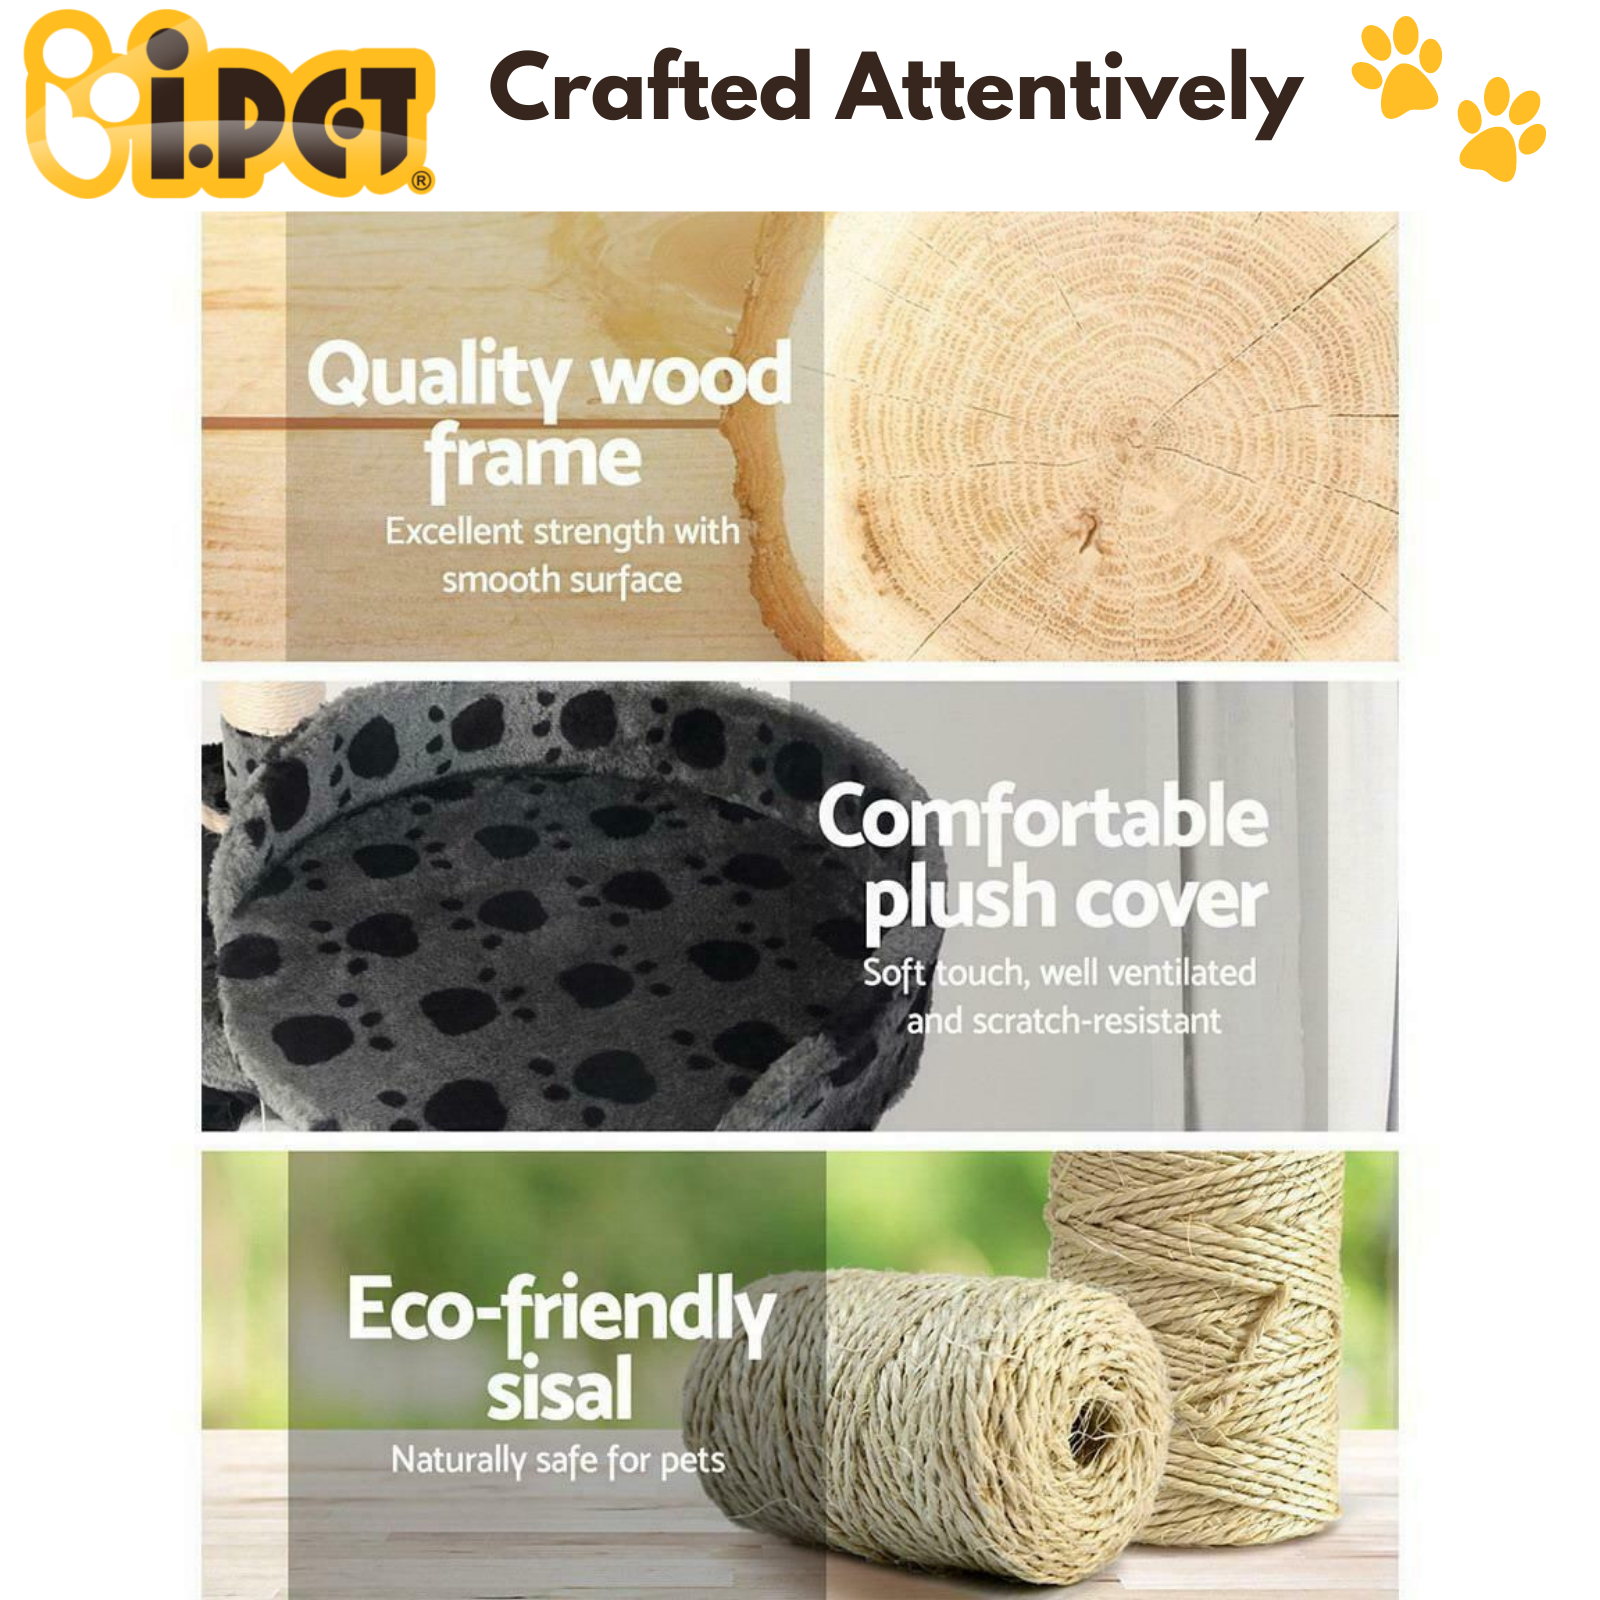 i.Pet Cat Scratching Post Tree features quality wood frame, comfortable plush cover and eco-friendly sisal